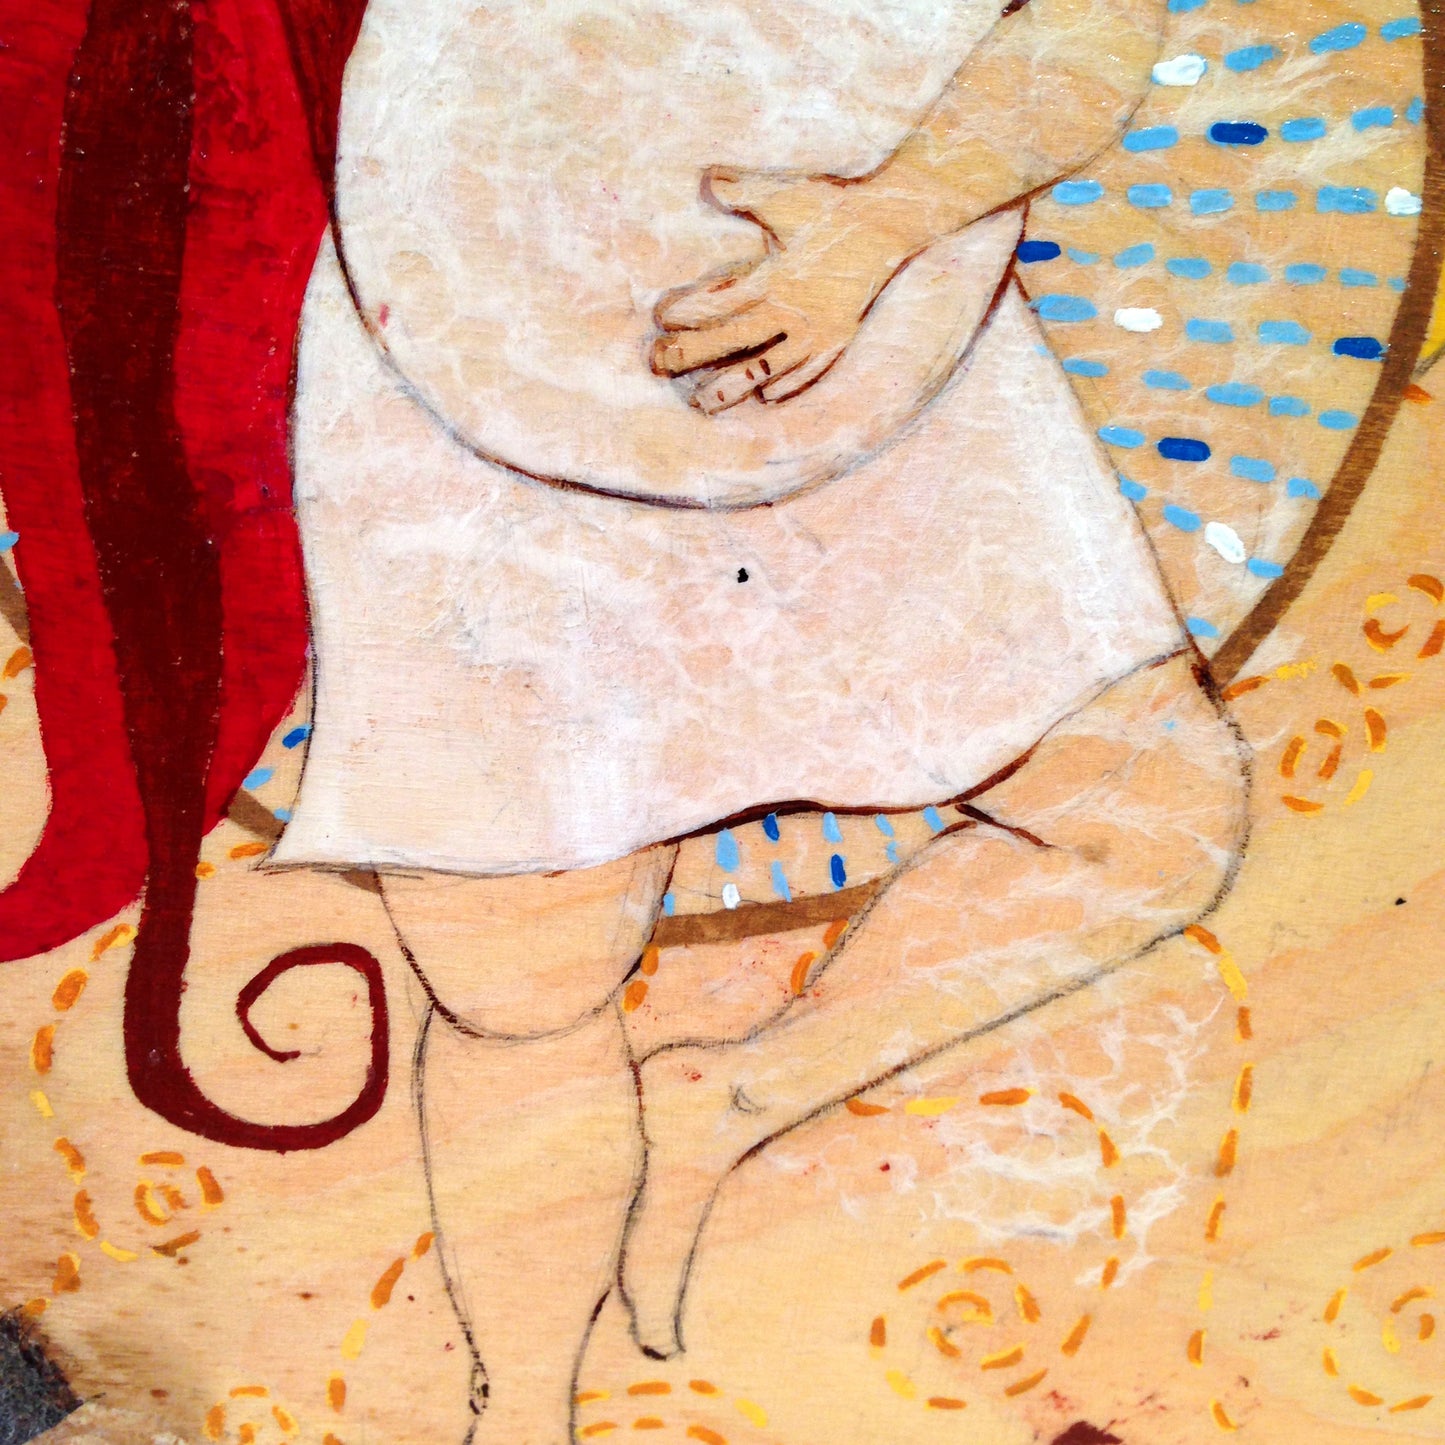 Detail of Belly Dance painting by Lea K. Tawd